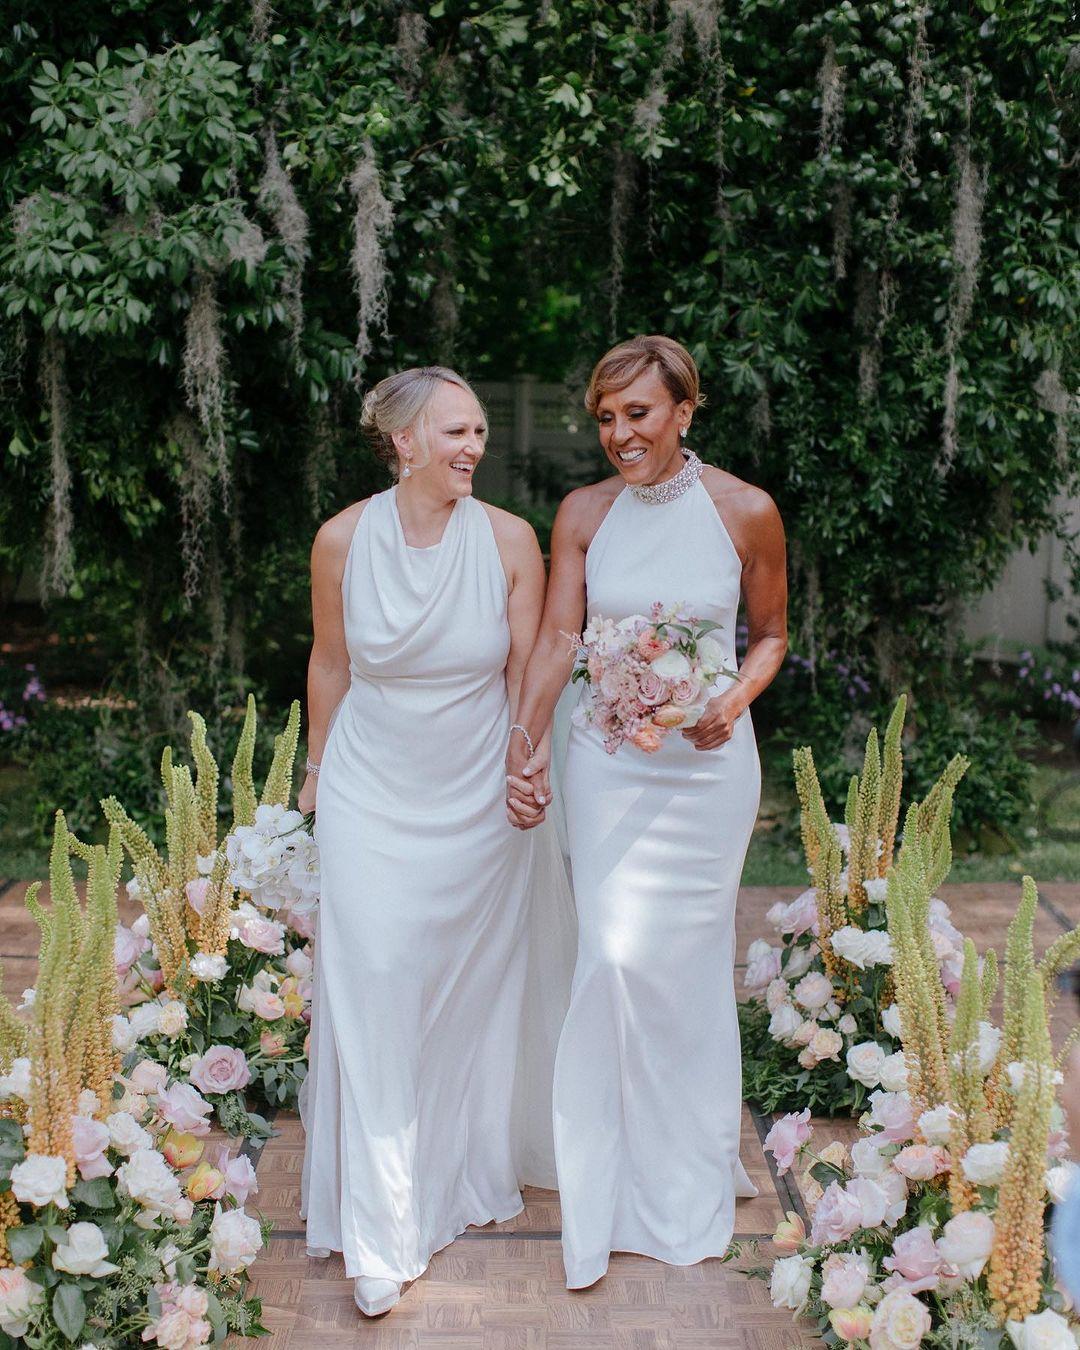 ‘GMA’ Host Robin Roberts Follows Through On ‘Saying Yes To Marriage’ With Amber Laign